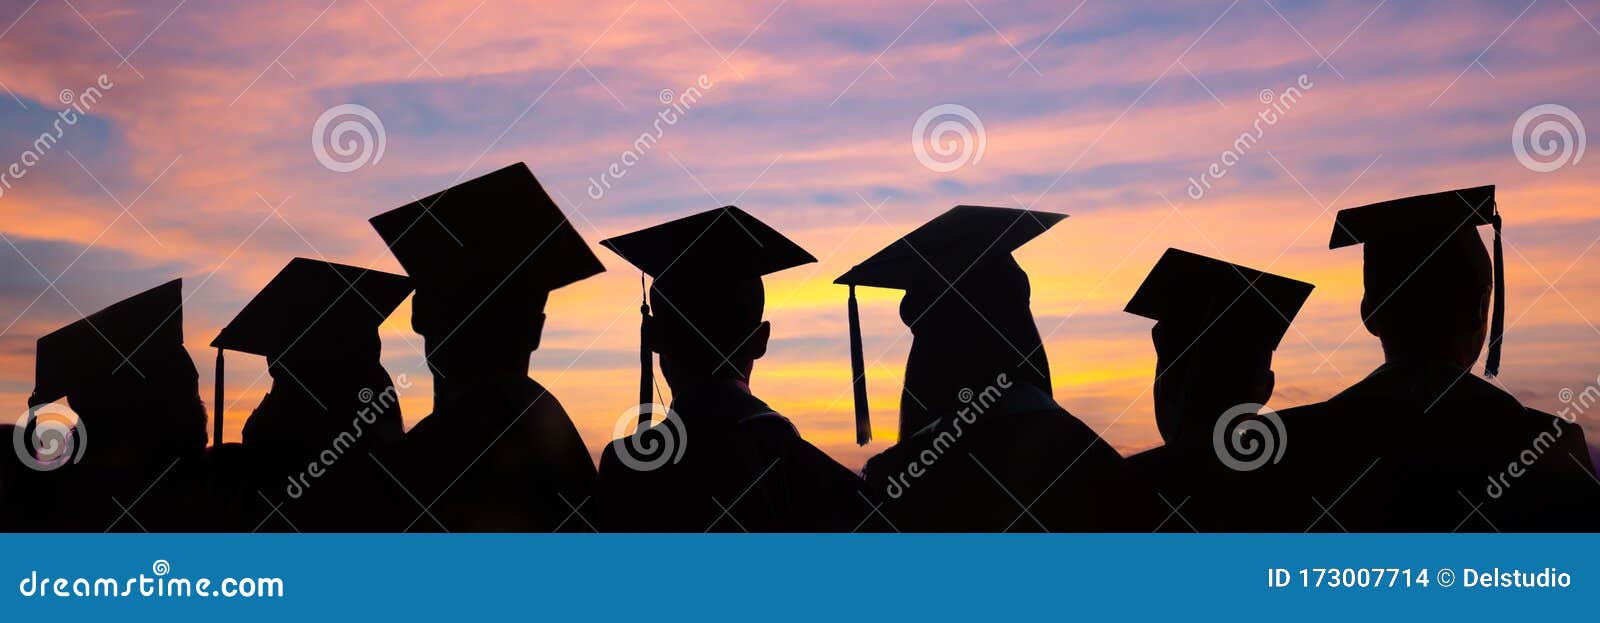 silhouettes of students with graduate caps in a row on sunset background. graduation ceremony web banner